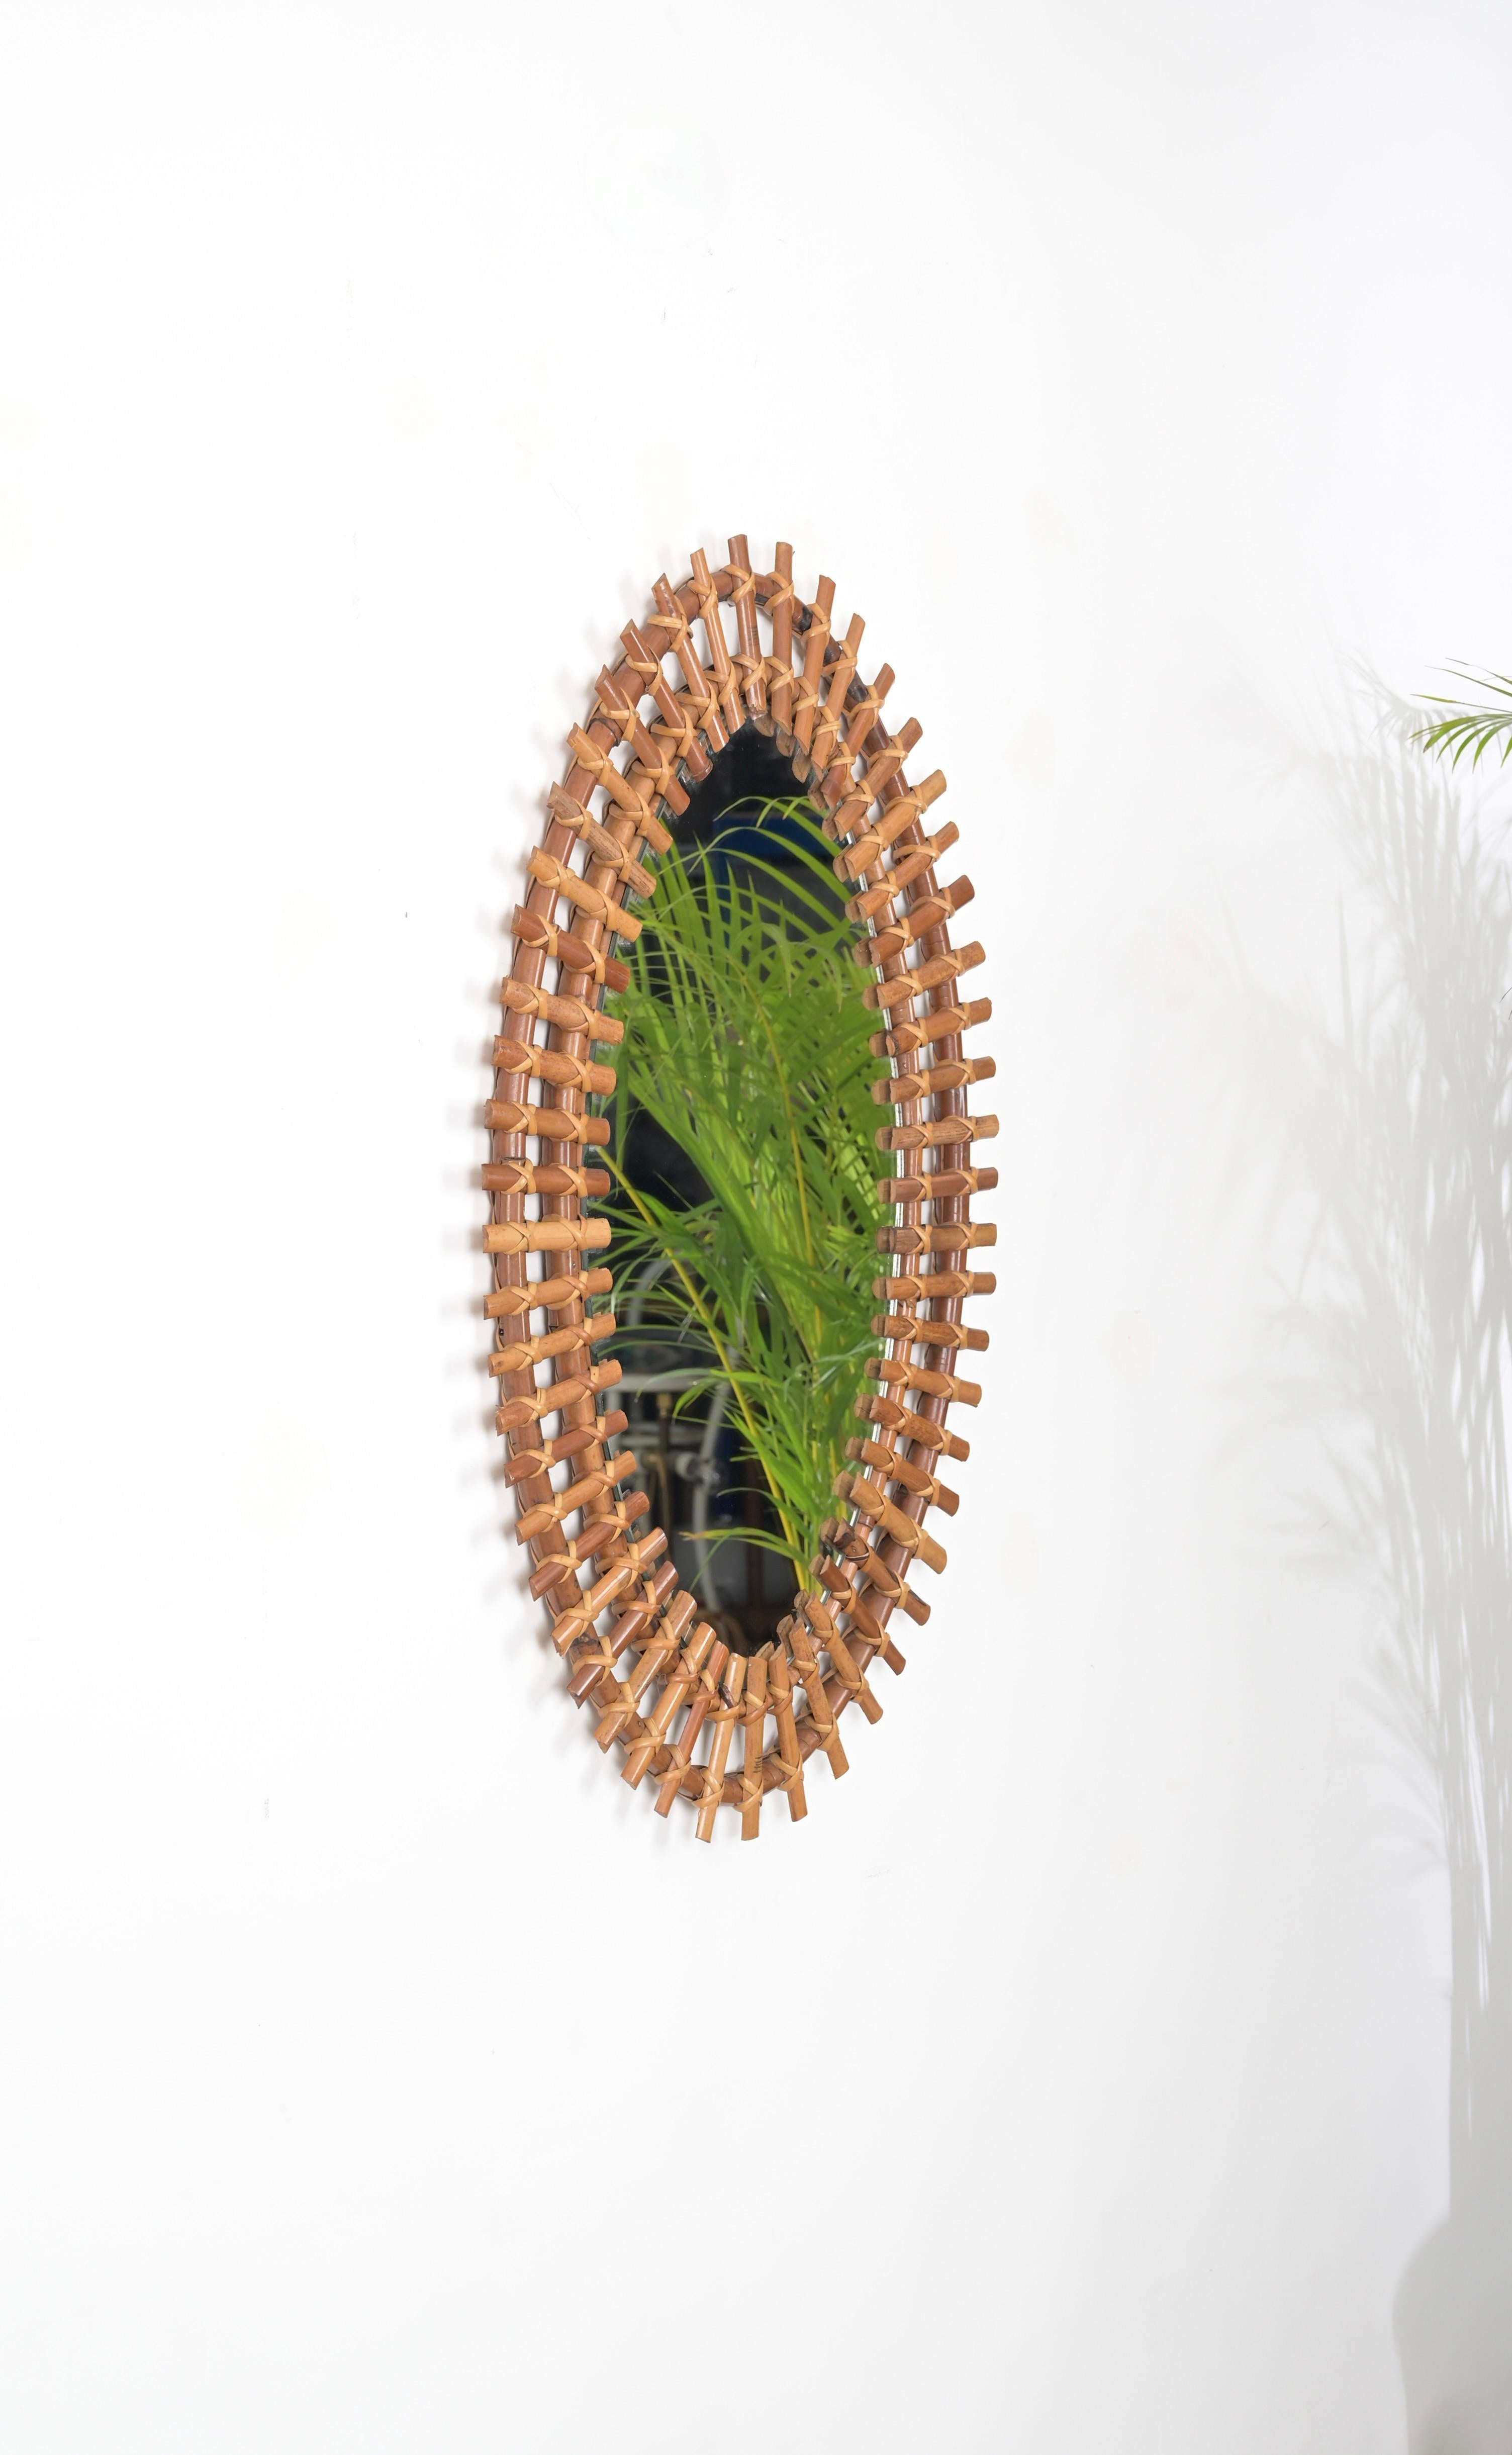 Midcentury French Riviera Oval Mirror in Rattan Wicker and Bamboo, Italy 1960s For Sale 4